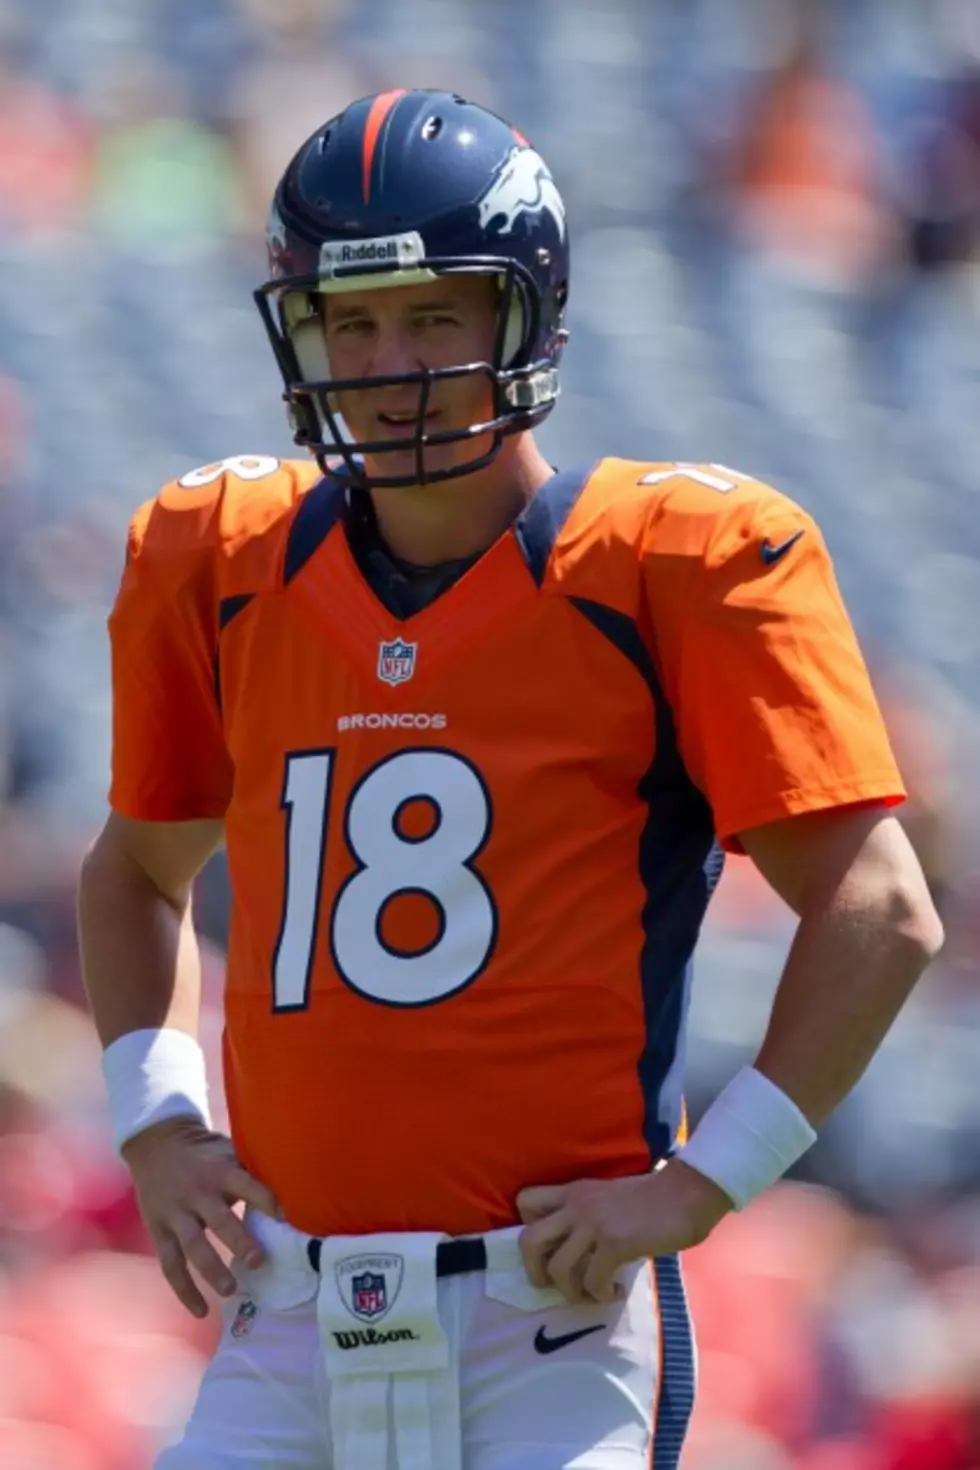 Peyton Manning’s Jersey Is Banned From A Colorado School District Because Of Gang Affiliations With The Number 18